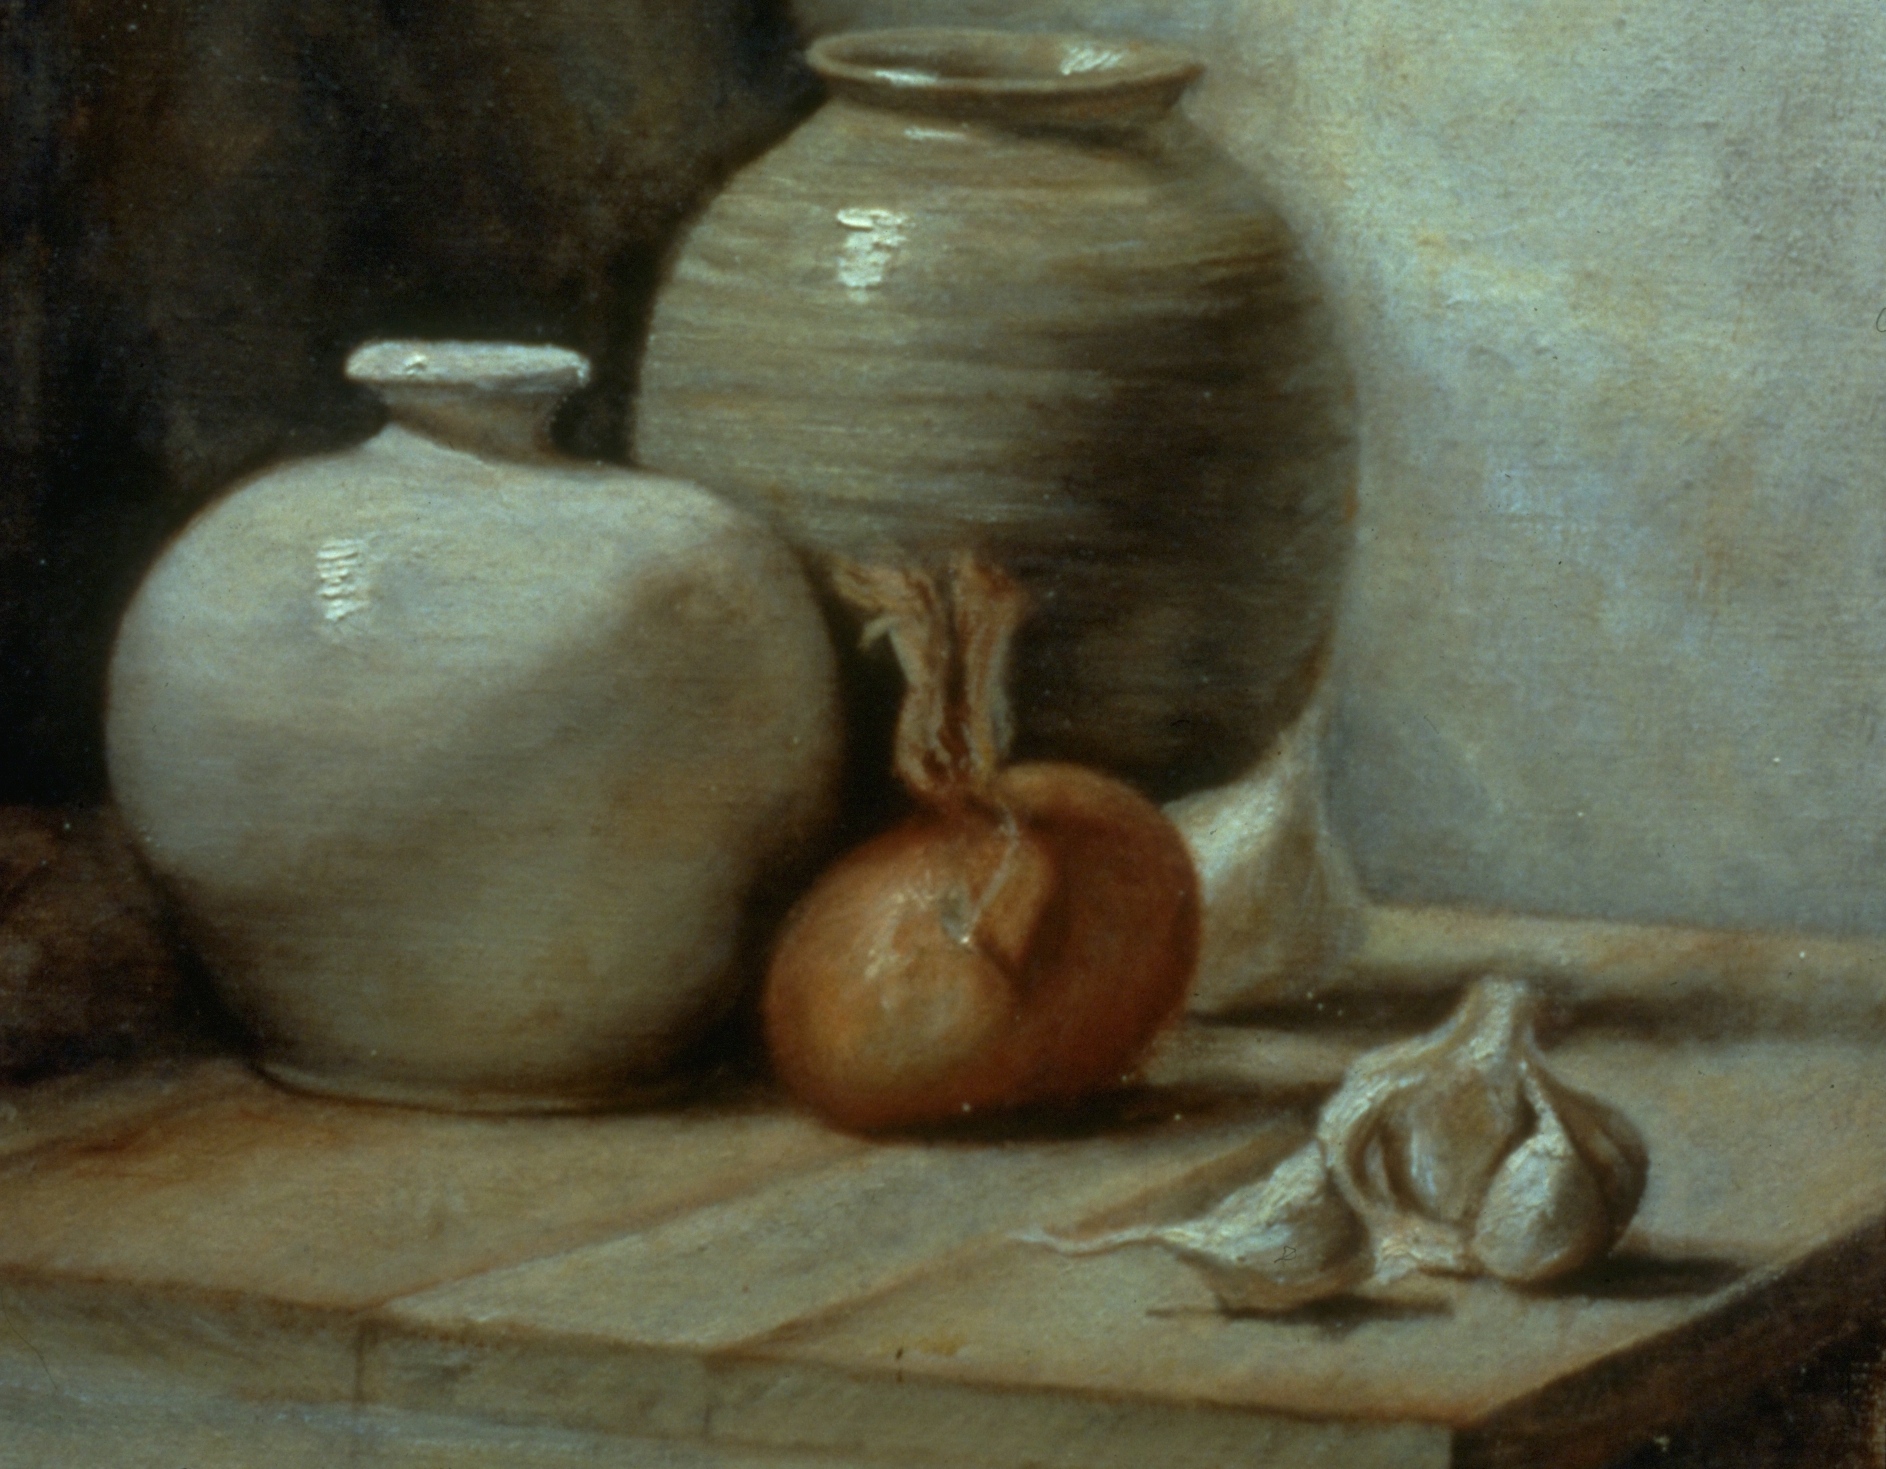 Two Vases, An Onion and A Garlic